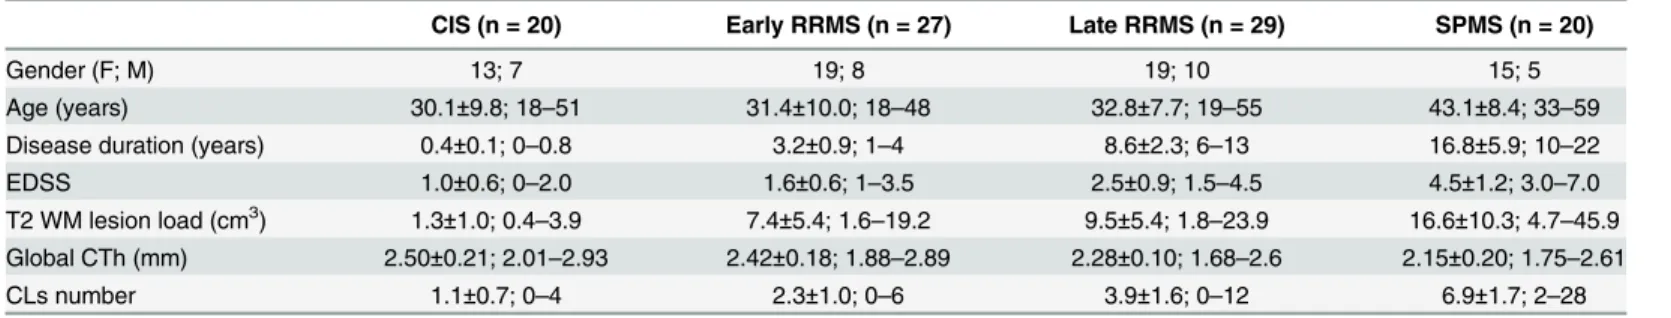 Table 1. Demographical, clinical, and MRI characteristics of the studied population.